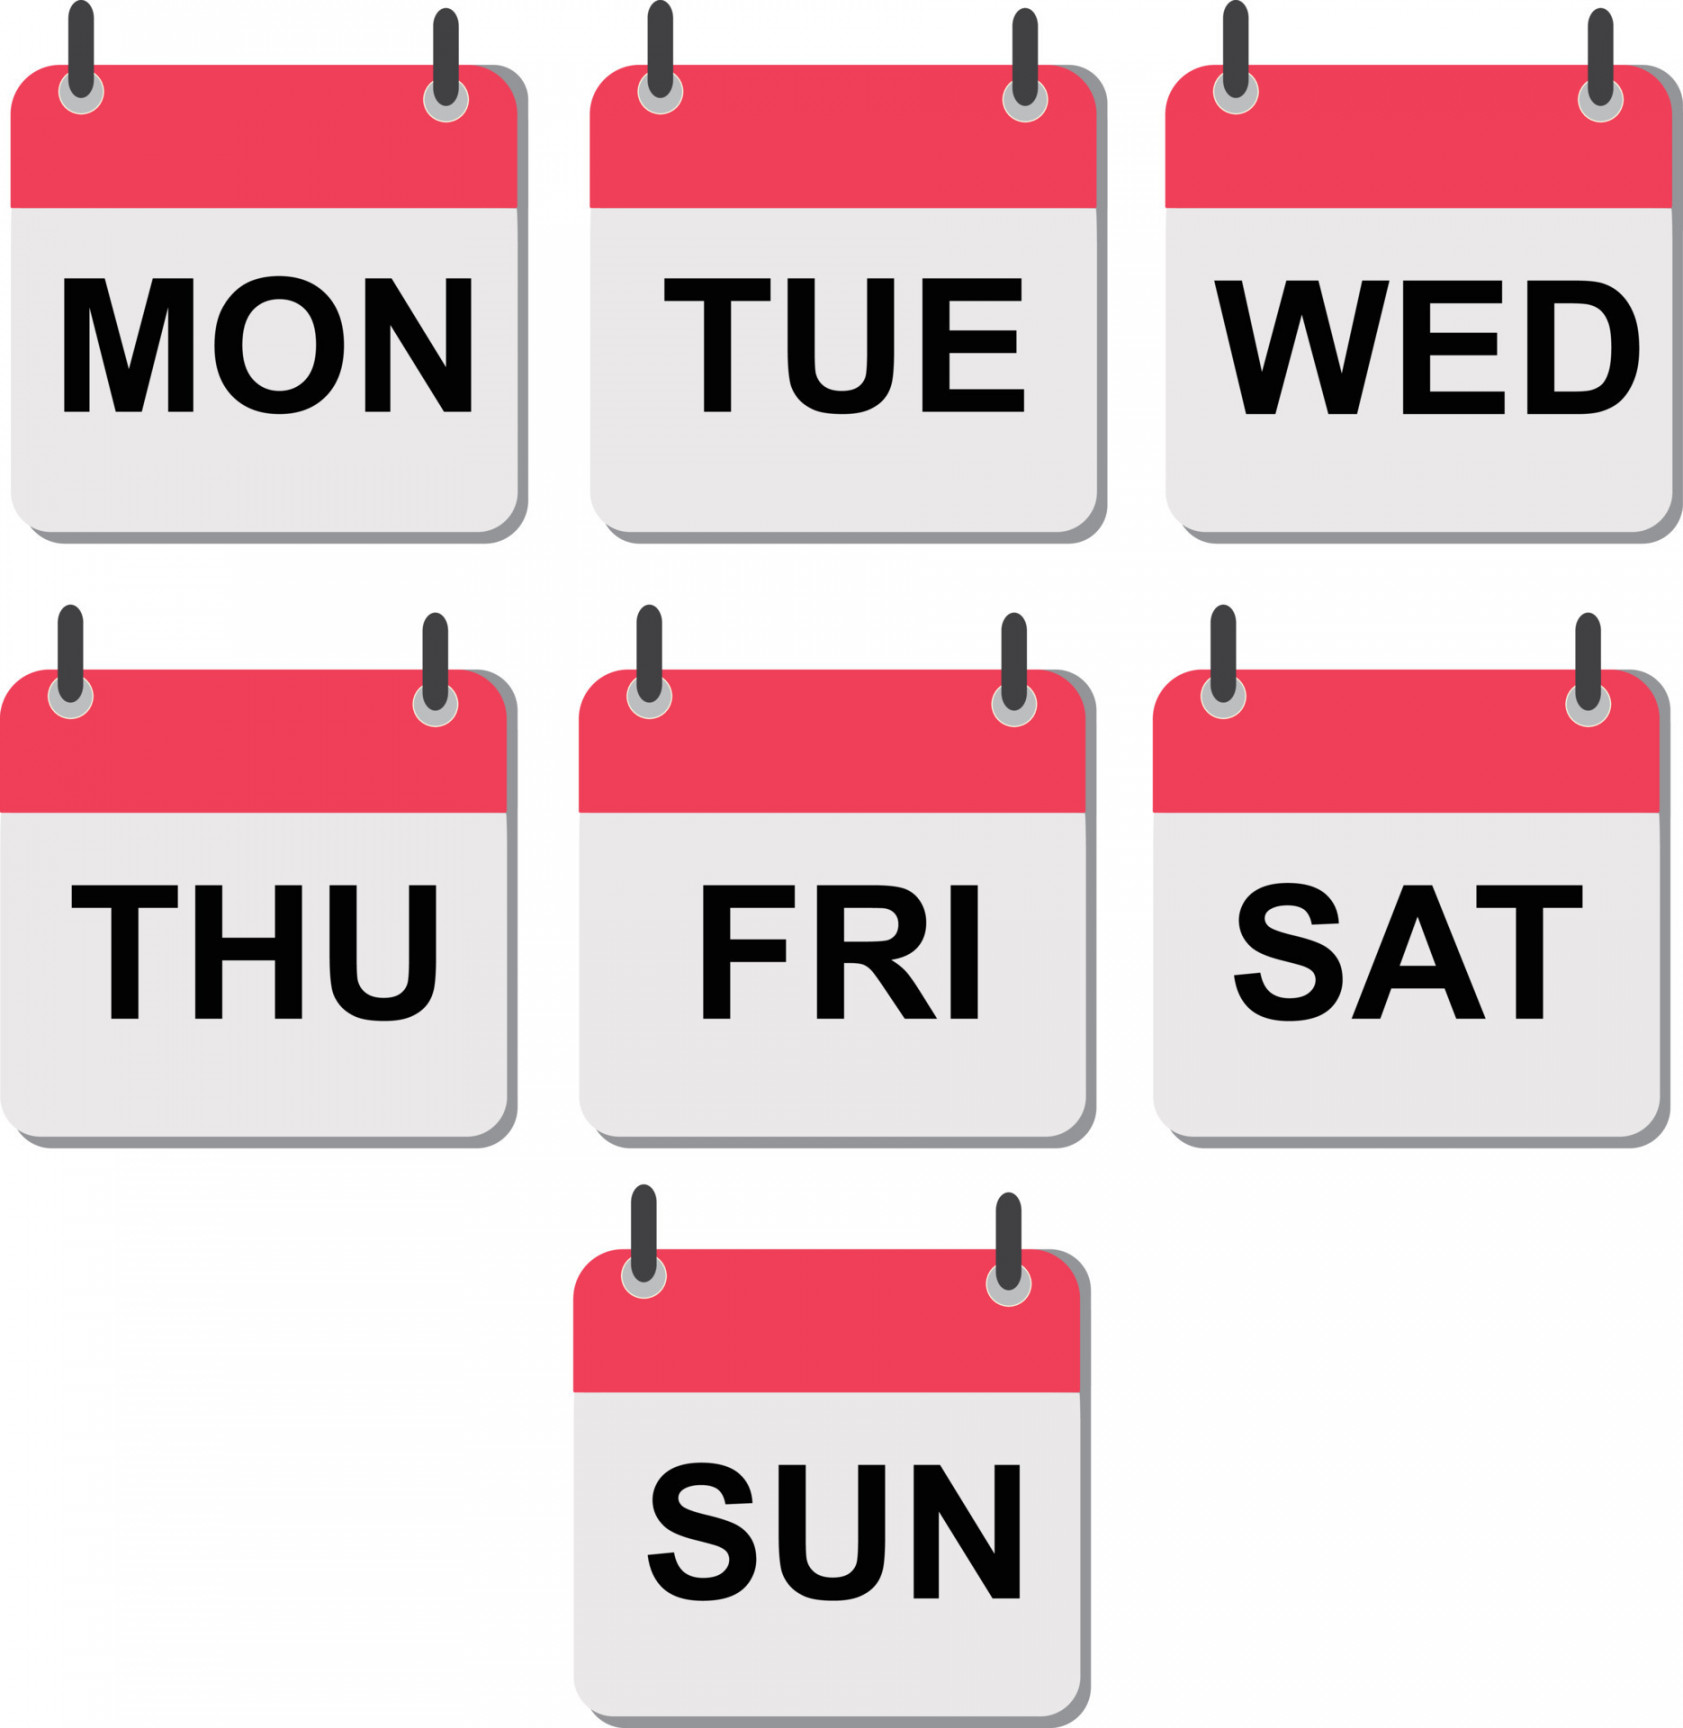 Calendar icons with days of the week